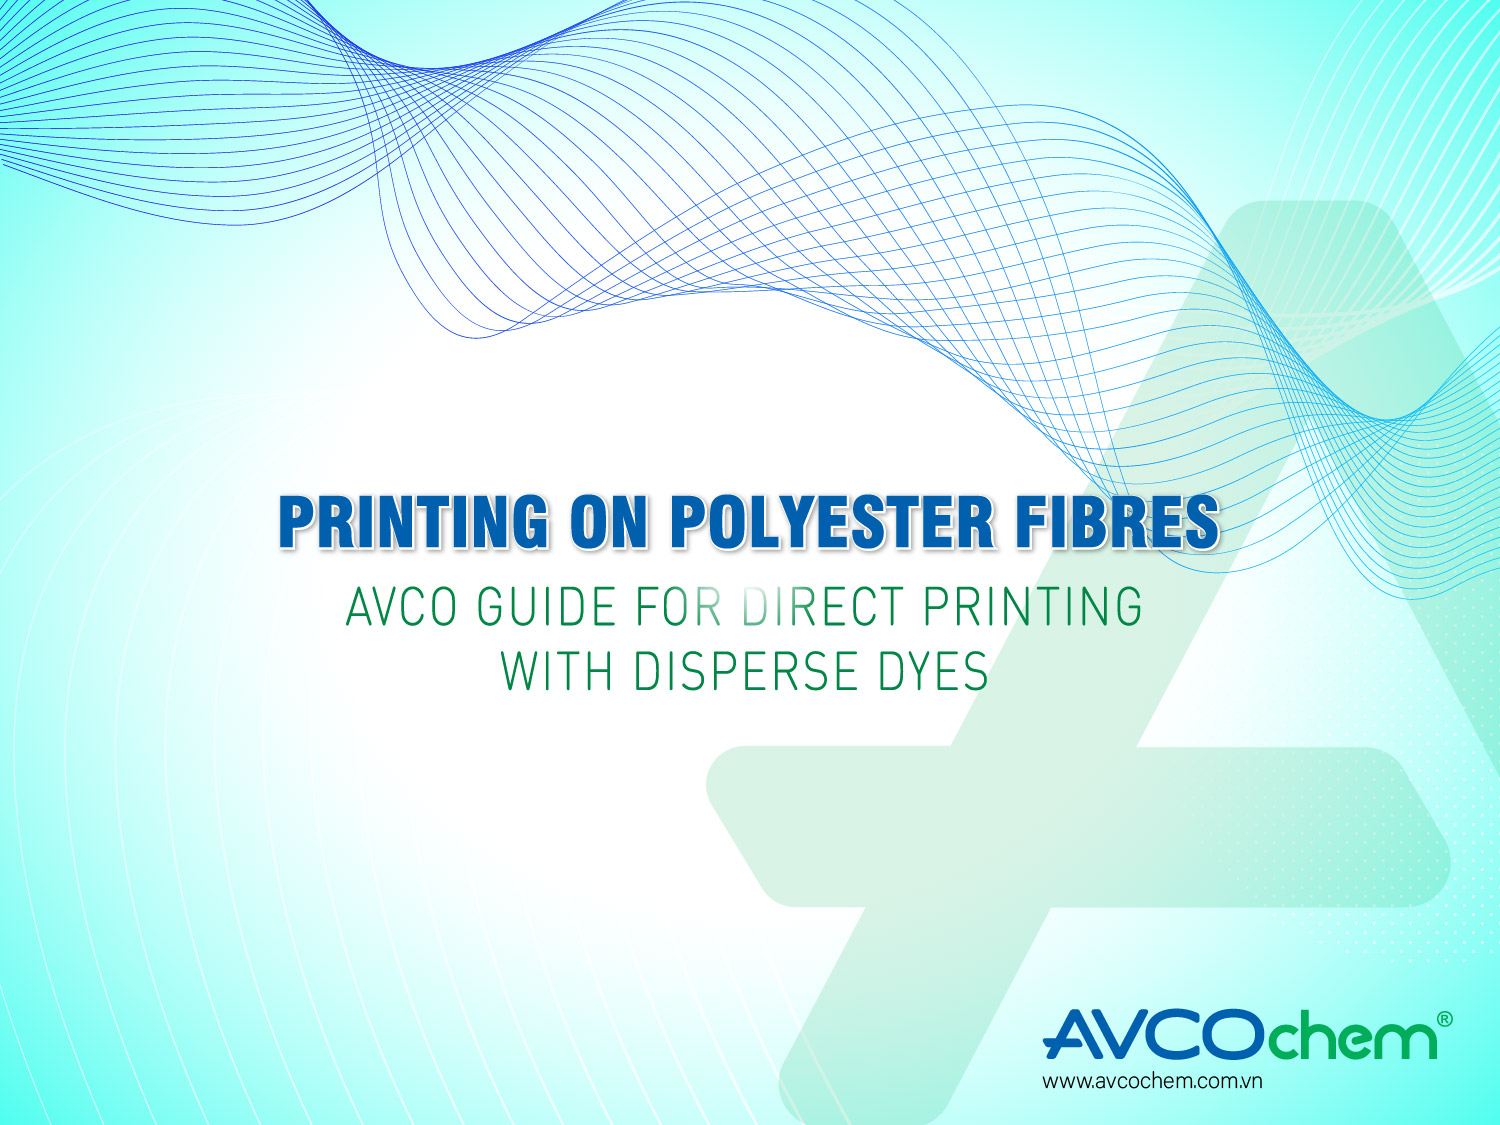 PRINTING ON POLYESTER FIBRES